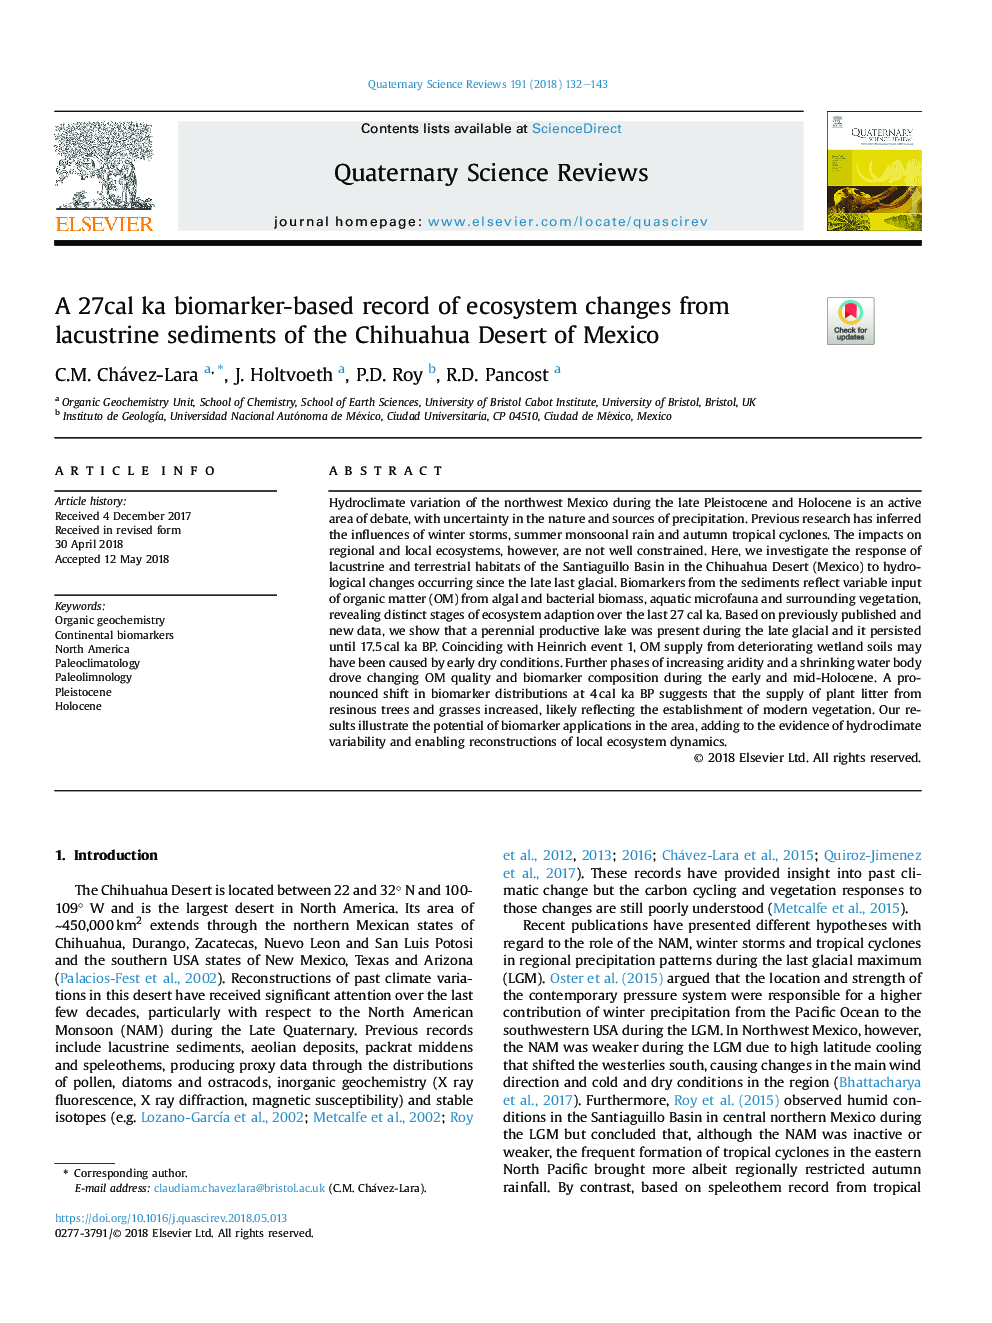 A 27cal ka biomarker-based record of ecosystem changes from lacustrine sediments of the Chihuahua Desert of Mexico